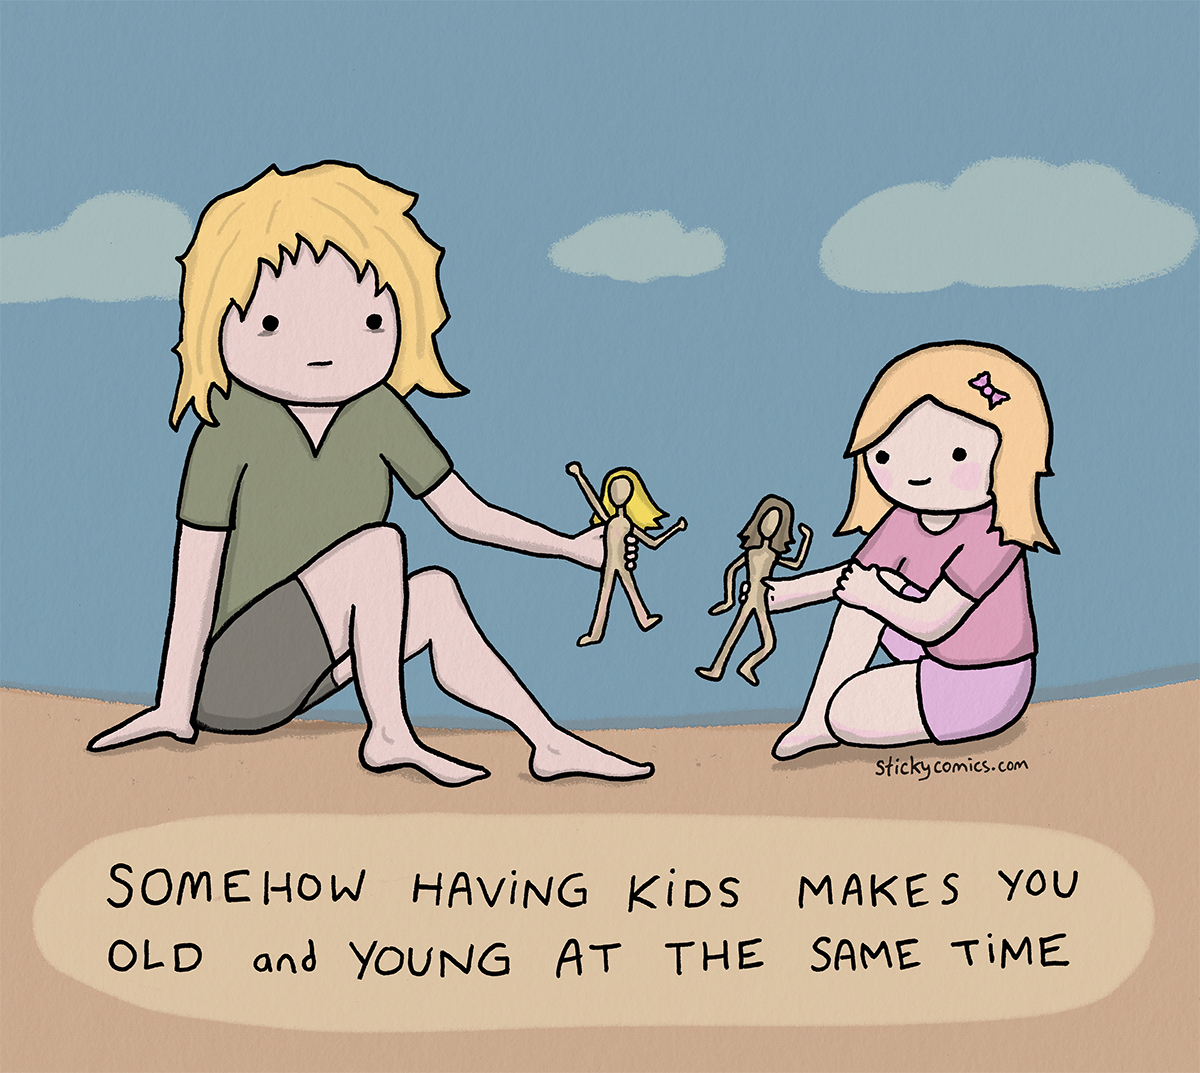 Caption: Somehow having kids makes you old and young at the same time. Picture: Tired, playing with dolls with a little girl. 